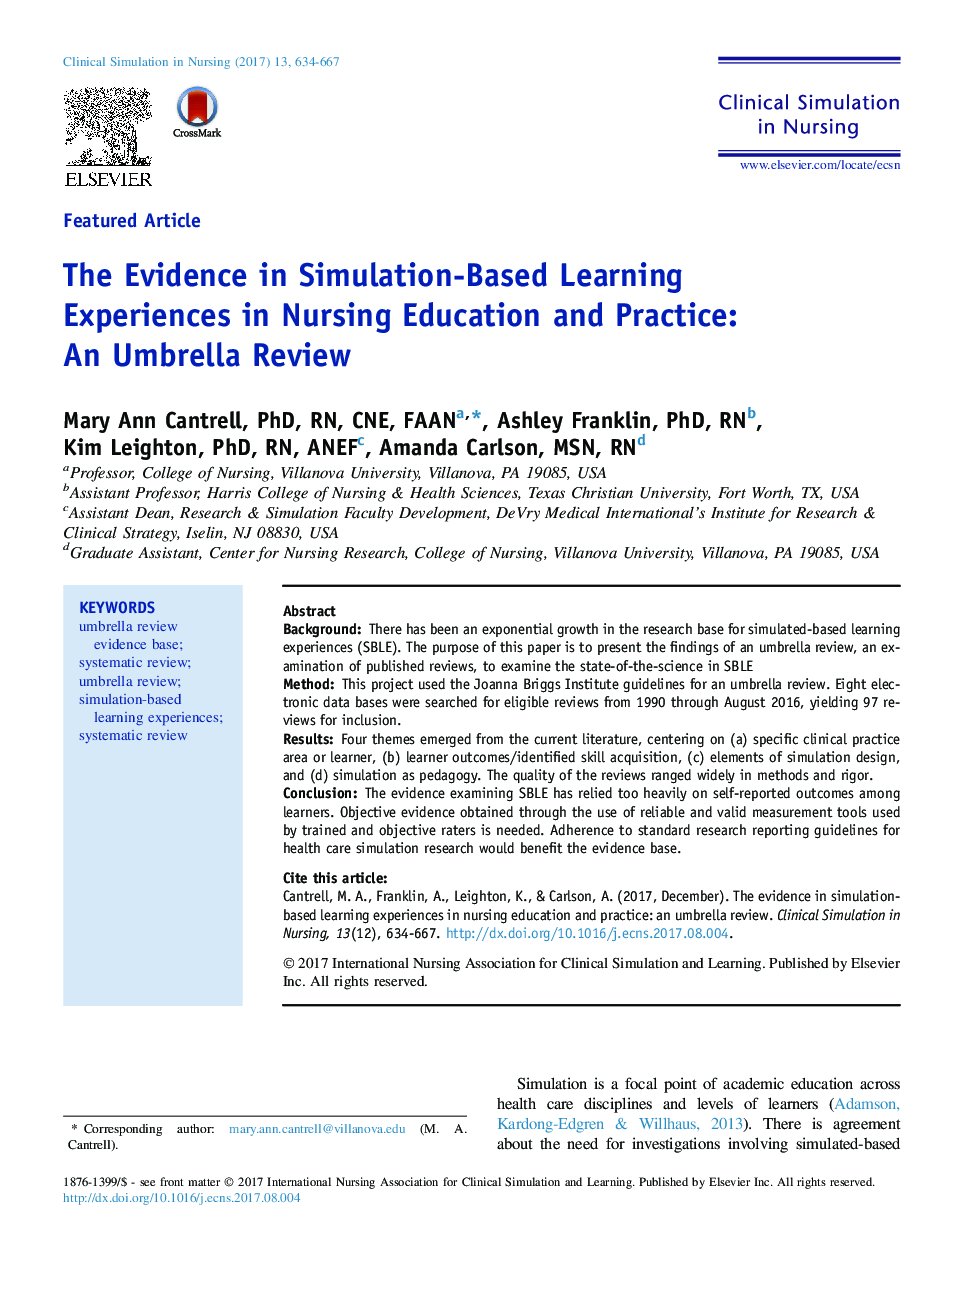 The Evidence in Simulation-Based Learning Experiences in Nursing Education and Practice: An Umbrella Review